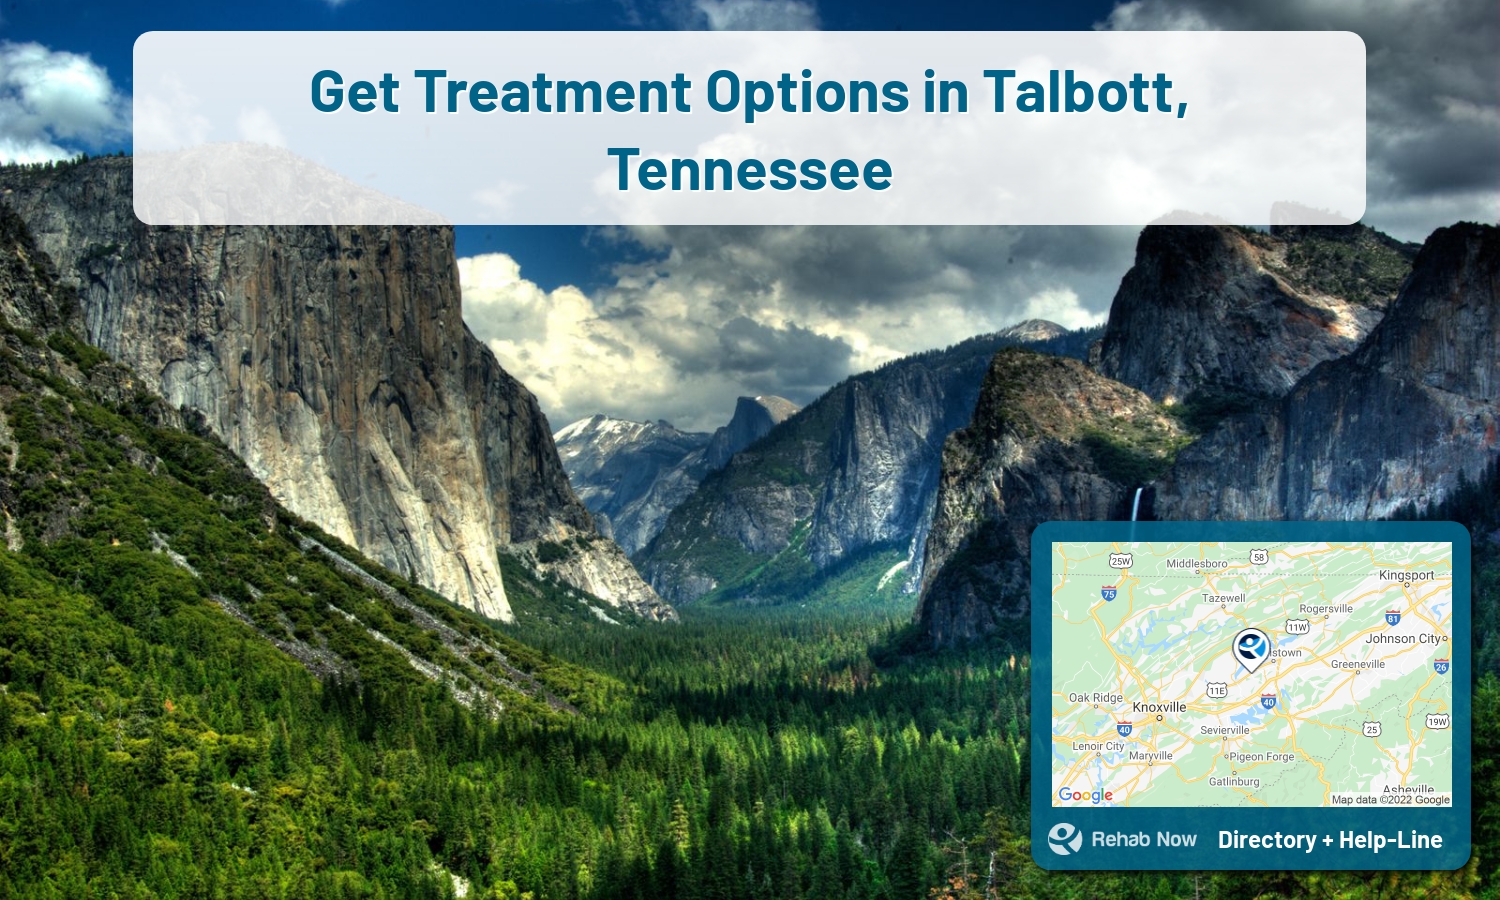 Talbott, TN Treatment Centers. Find drug rehab in Talbott, Tennessee, or detox and treatment programs. Get the right help now!